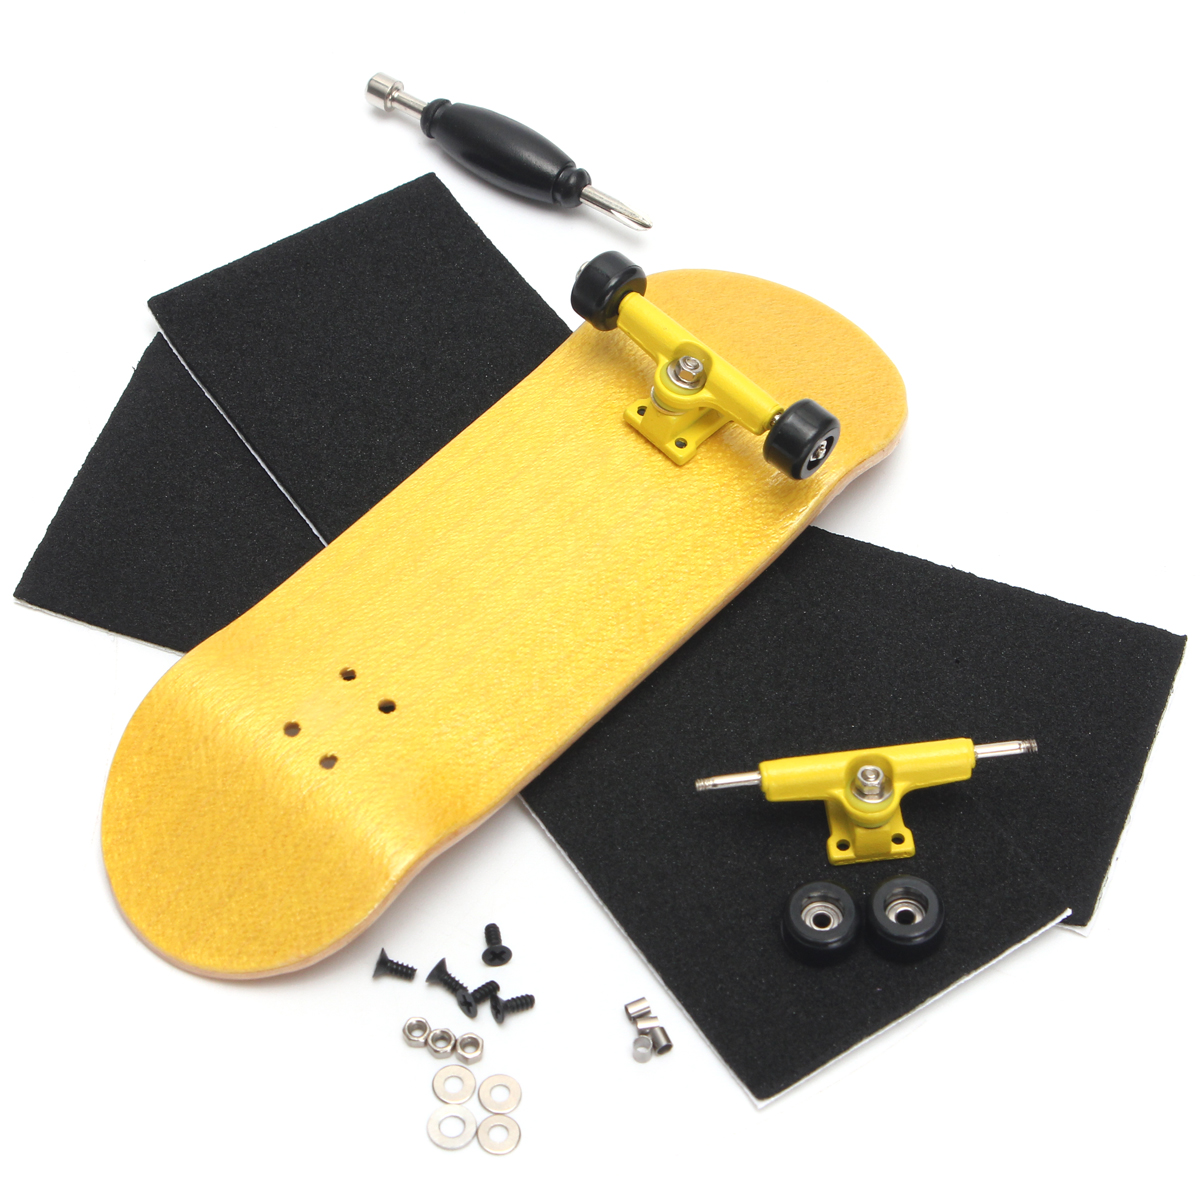 Basic Complete Wooden Fingerboard Finger Scooter with Bearing Grit Box Foam Tape Yellow - intl